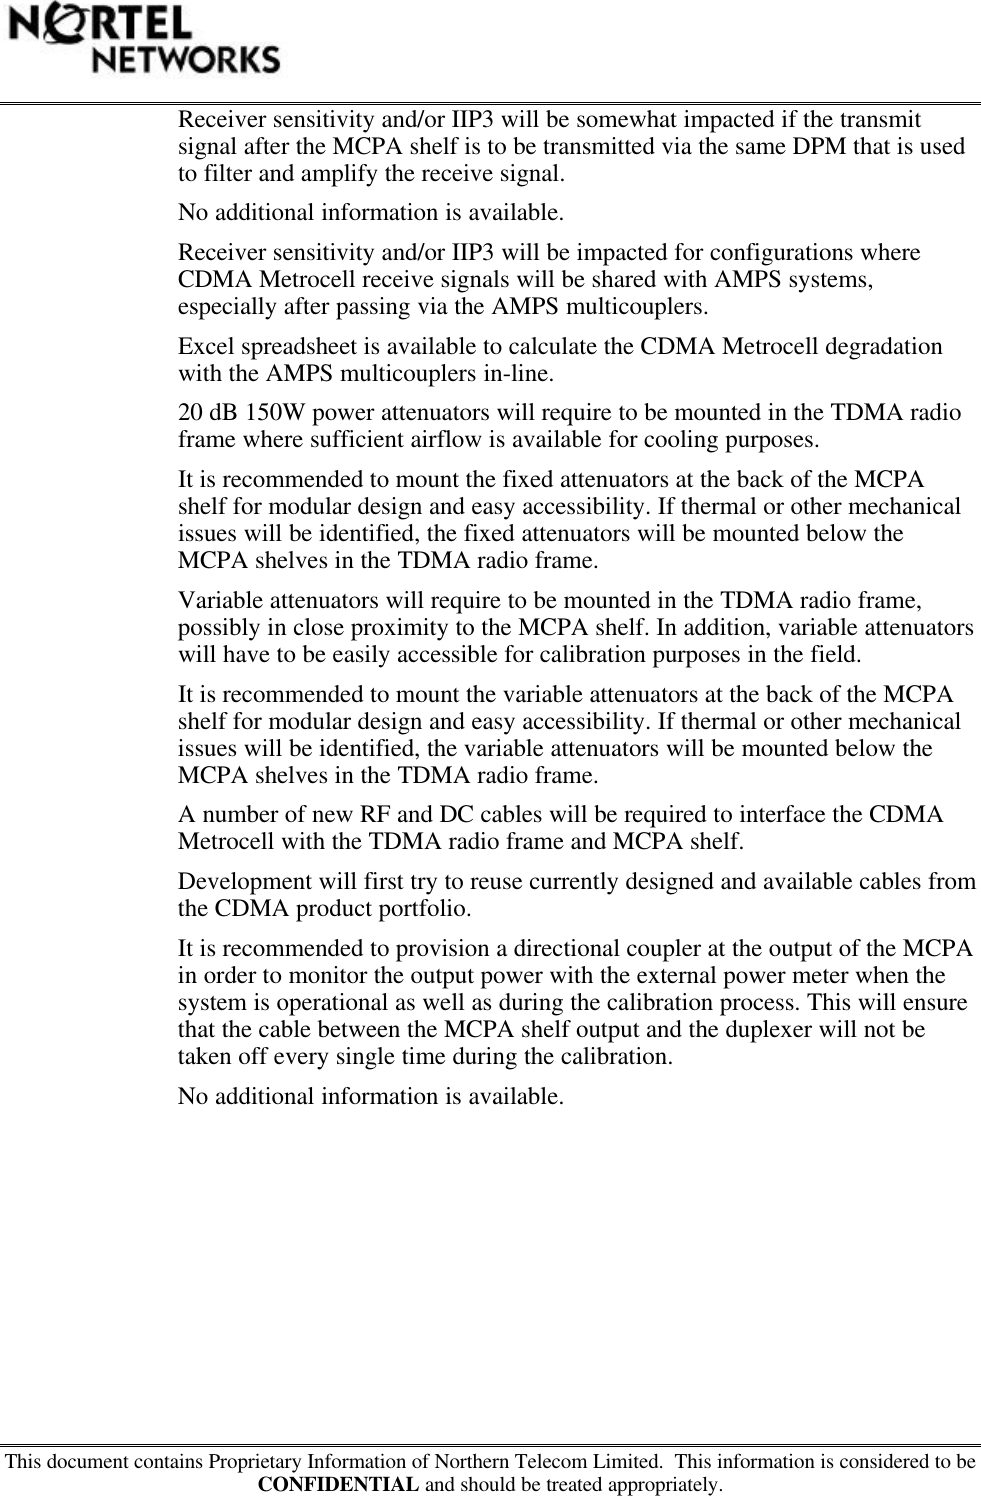 This document contains Proprietary Information of Northern Telecom Limited.  This information is considered to beCONFIDENTIAL and should be treated appropriately.Receiver sensitivity and/or IIP3 will be somewhat impacted if the transmitsignal after the MCPA shelf is to be transmitted via the same DPM that is usedto filter and amplify the receive signal.No additional information is available.Receiver sensitivity and/or IIP3 will be impacted for configurations whereCDMA Metrocell receive signals will be shared with AMPS systems,especially after passing via the AMPS multicouplers.Excel spreadsheet is available to calculate the CDMA Metrocell degradationwith the AMPS multicouplers in-line.20 dB 150W power attenuators will require to be mounted in the TDMA radioframe where sufficient airflow is available for cooling purposes.It is recommended to mount the fixed attenuators at the back of the MCPAshelf for modular design and easy accessibility. If thermal or other mechanicalissues will be identified, the fixed attenuators will be mounted below theMCPA shelves in the TDMA radio frame.Variable attenuators will require to be mounted in the TDMA radio frame,possibly in close proximity to the MCPA shelf. In addition, variable attenuatorswill have to be easily accessible for calibration purposes in the field.It is recommended to mount the variable attenuators at the back of the MCPAshelf for modular design and easy accessibility. If thermal or other mechanicalissues will be identified, the variable attenuators will be mounted below theMCPA shelves in the TDMA radio frame.A number of new RF and DC cables will be required to interface the CDMAMetrocell with the TDMA radio frame and MCPA shelf.Development will first try to reuse currently designed and available cables fromthe CDMA product portfolio.It is recommended to provision a directional coupler at the output of the MCPAin order to monitor the output power with the external power meter when thesystem is operational as well as during the calibration process. This will ensurethat the cable between the MCPA shelf output and the duplexer will not betaken off every single time during the calibration.No additional information is available.